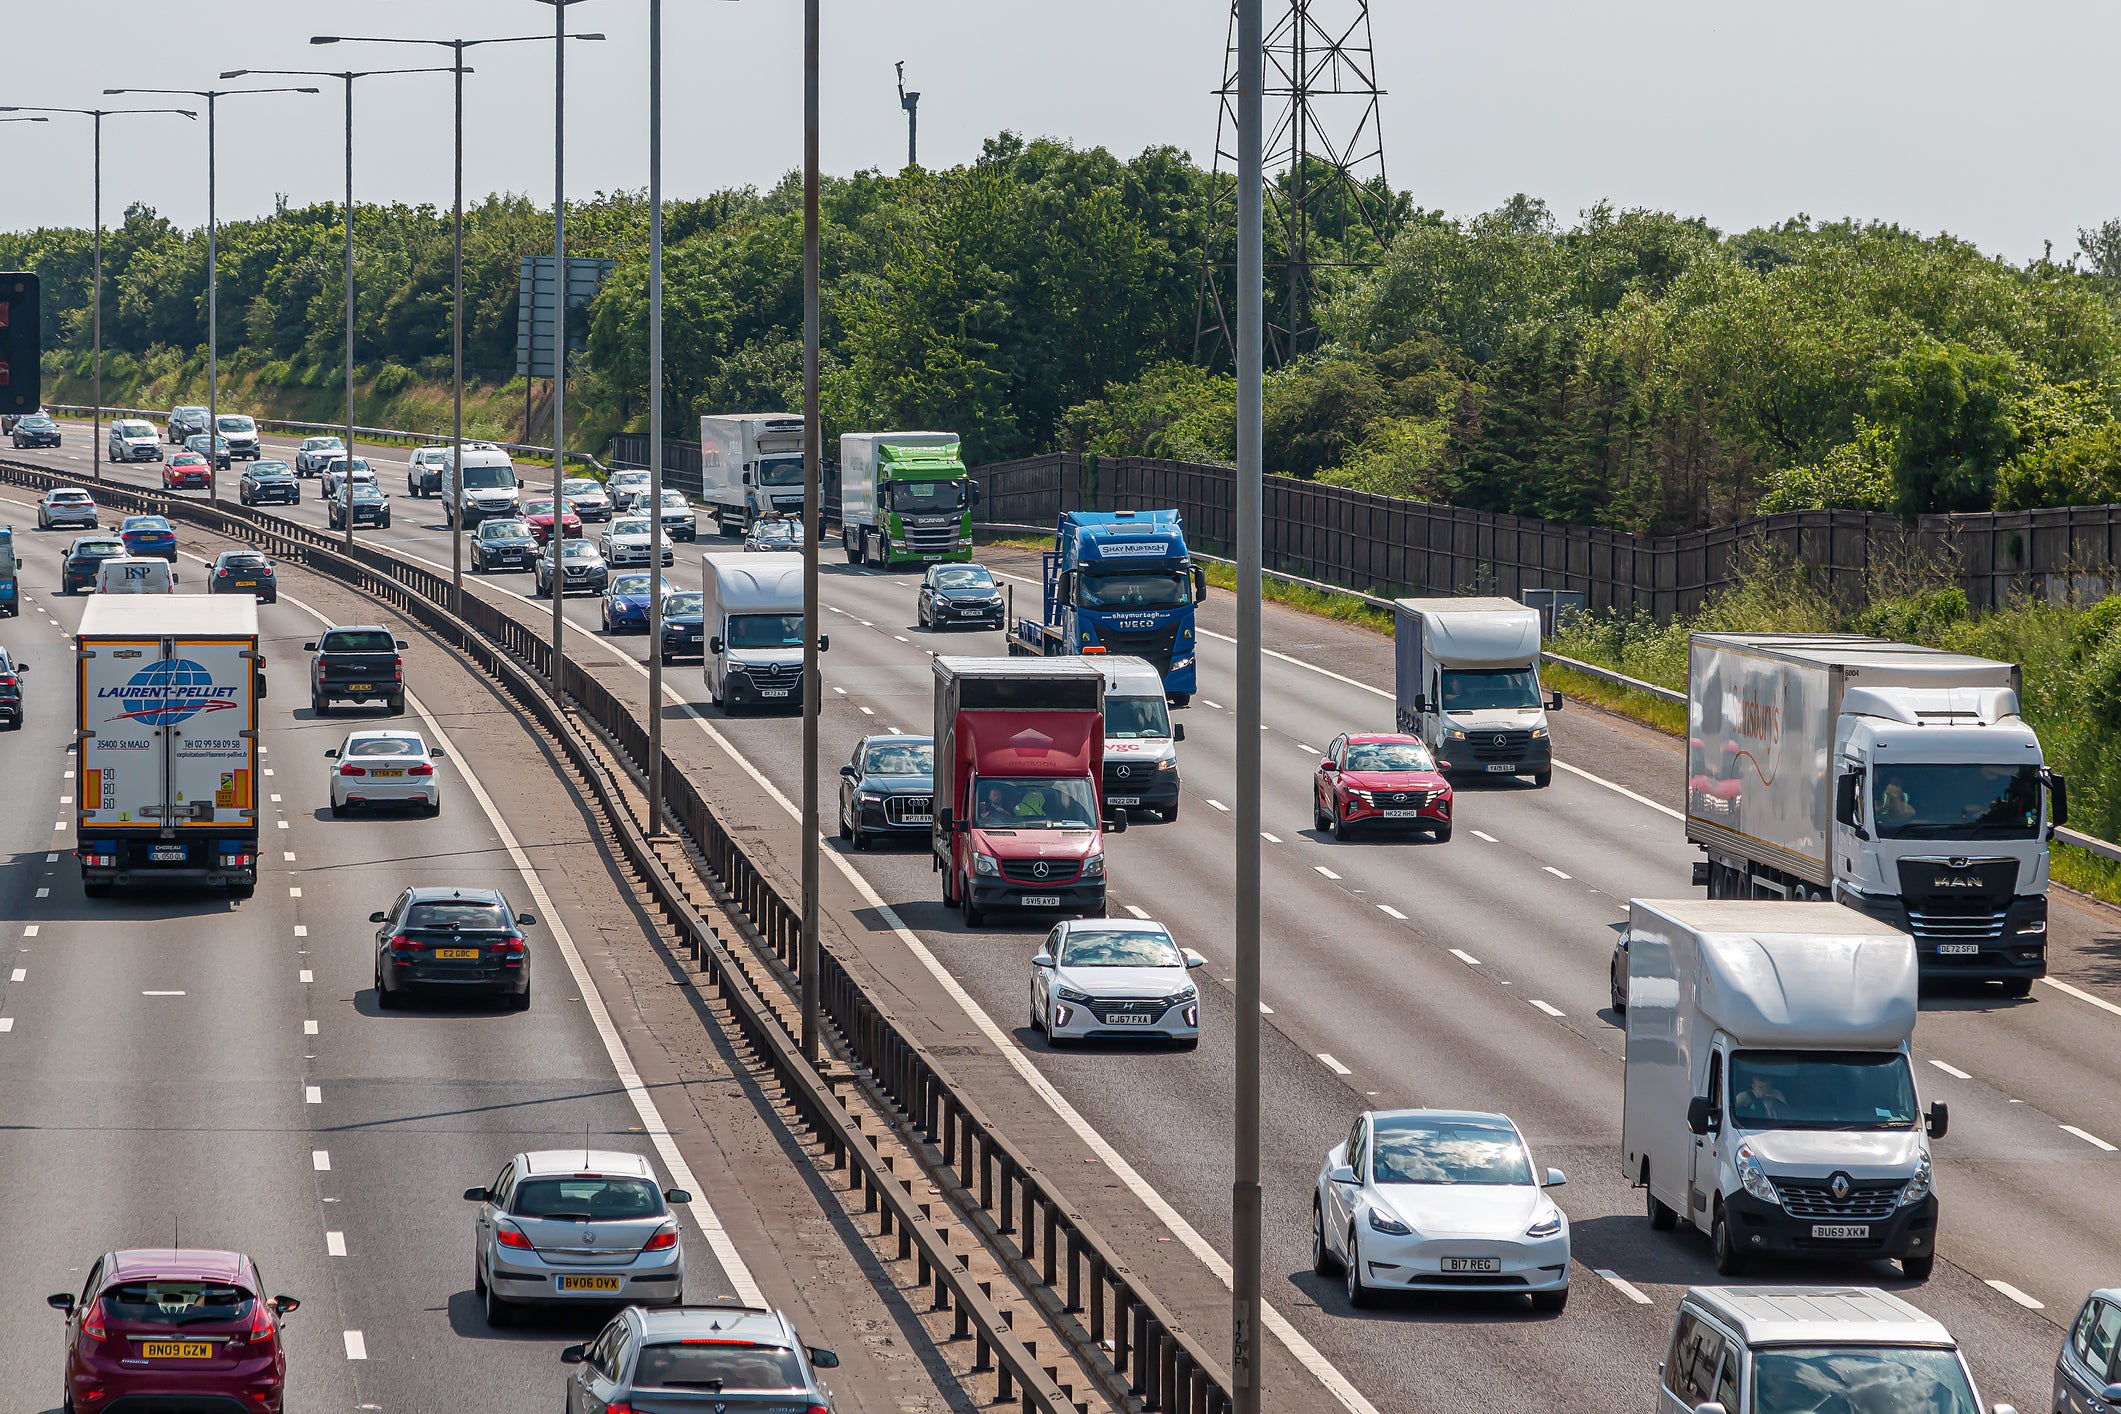 The M25 is likely to see delays on 28 March